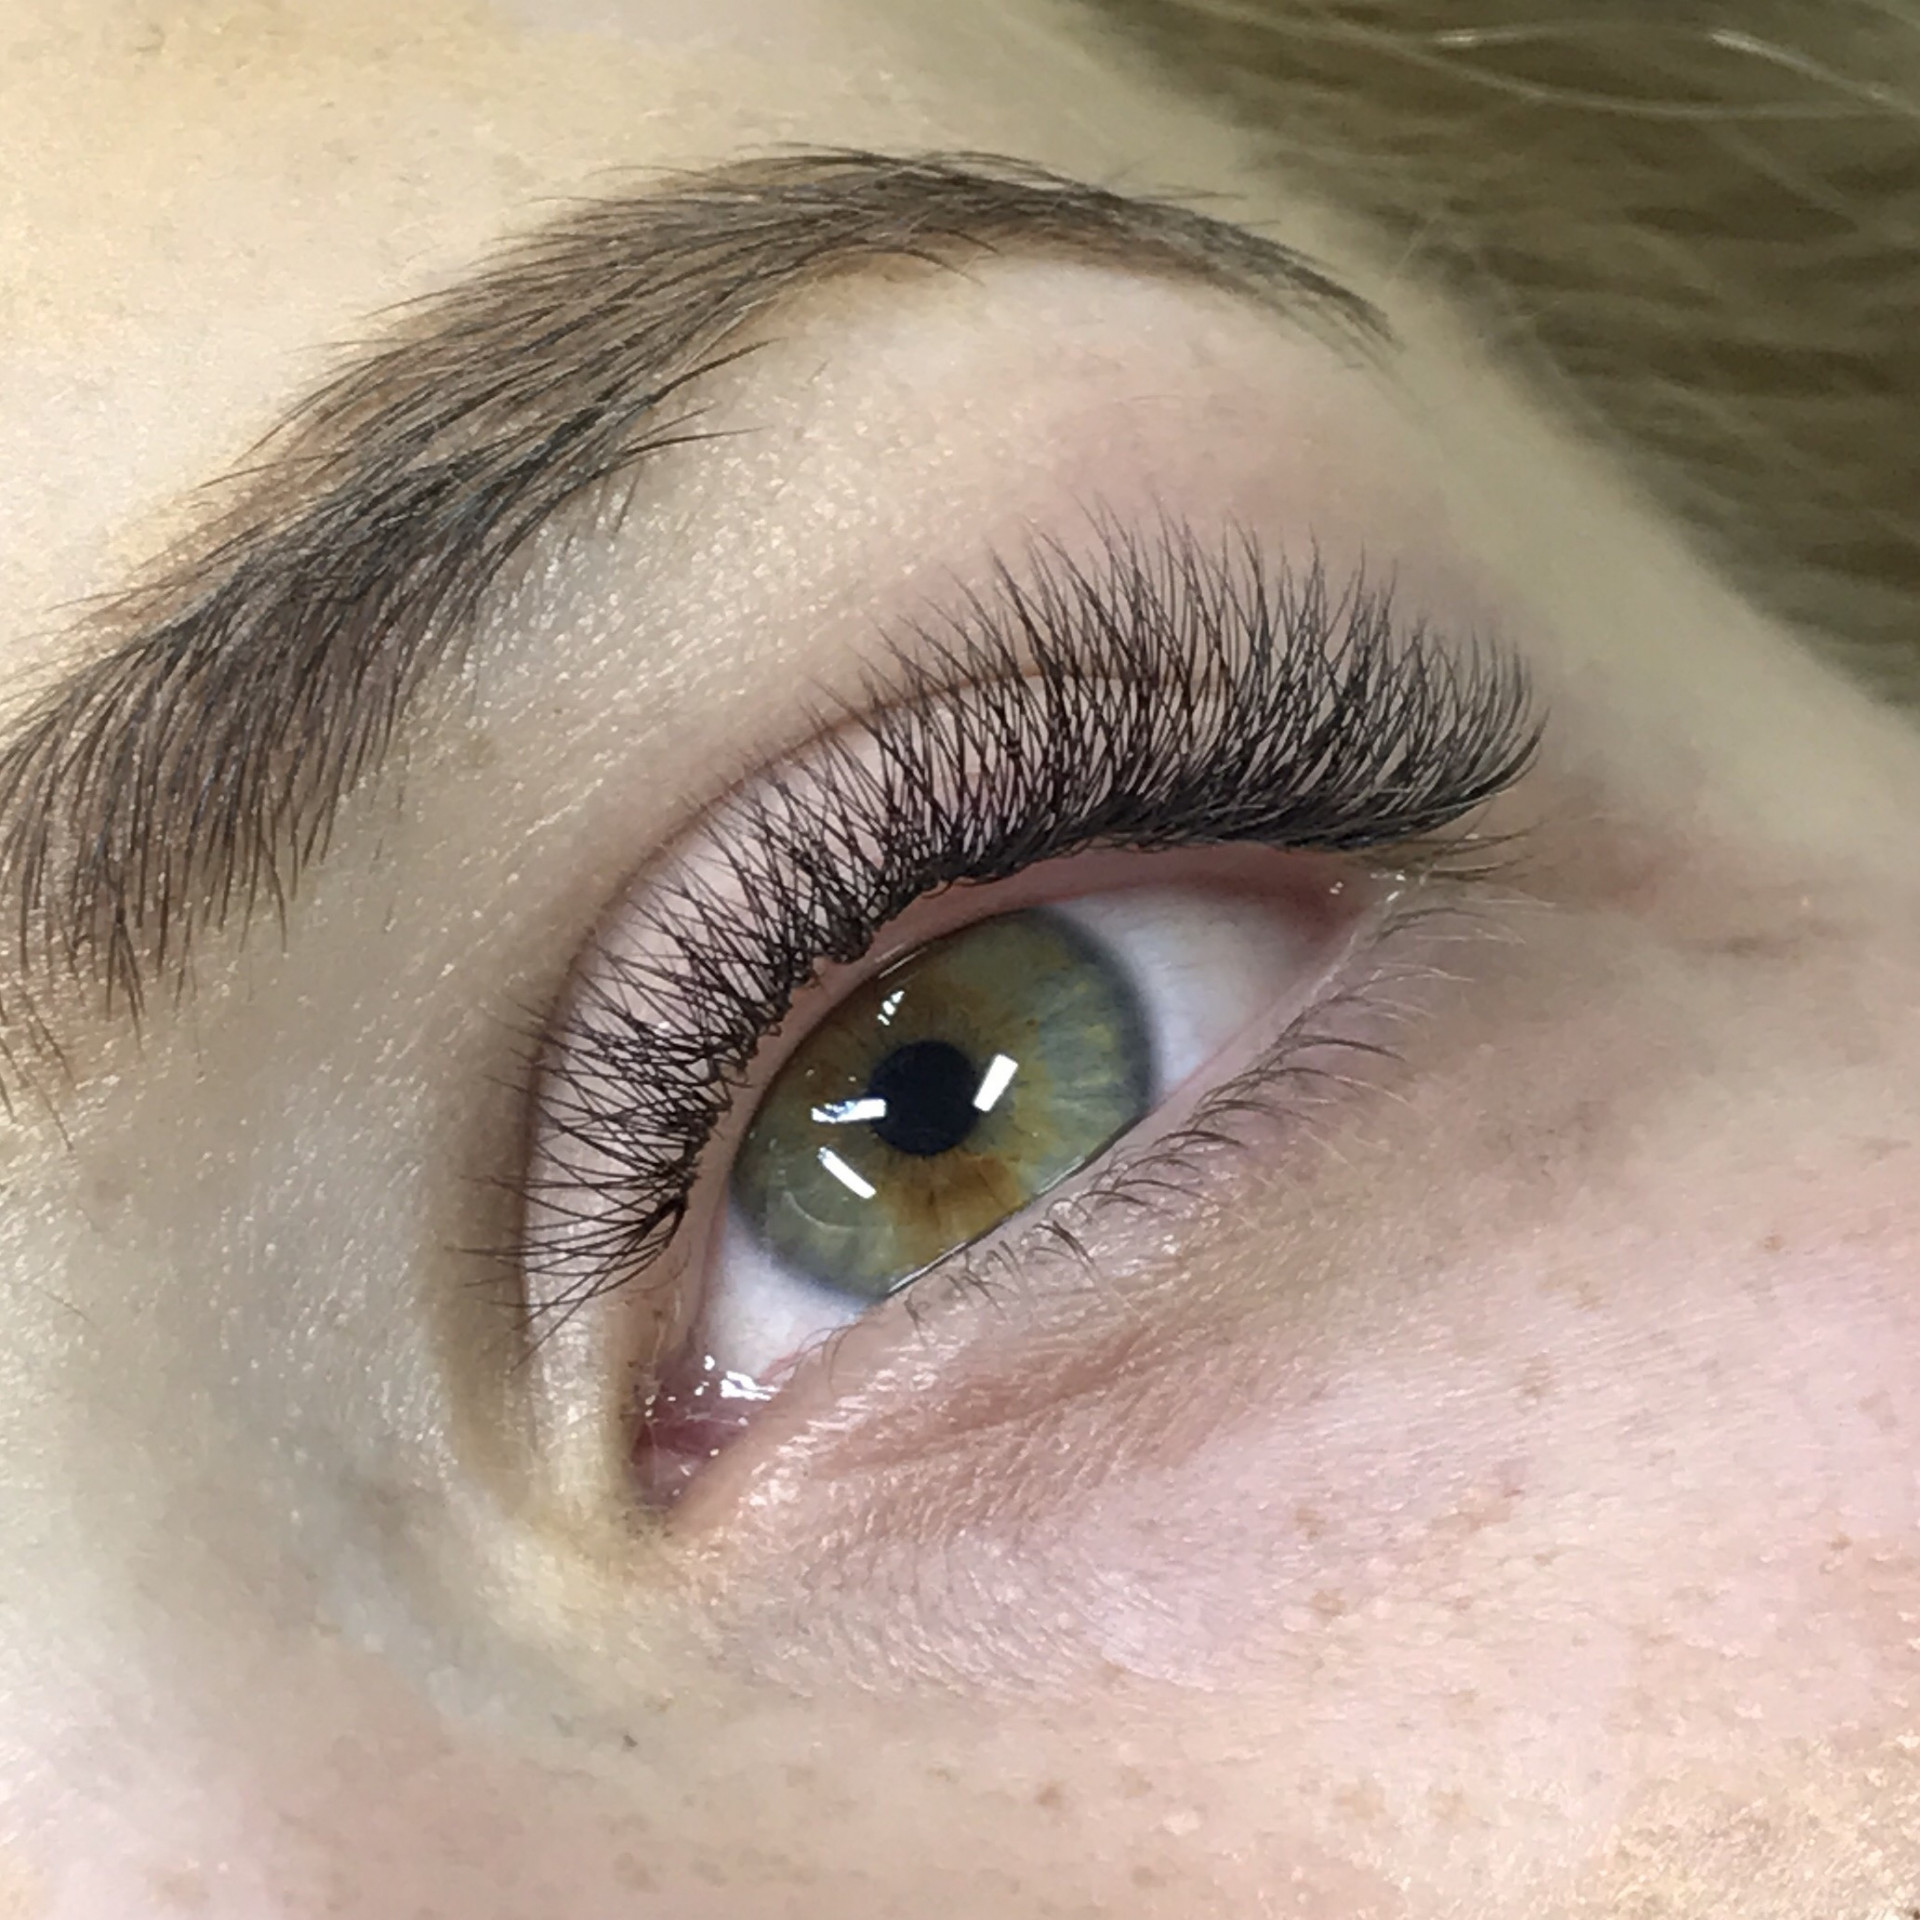 Benefits of 0.07 lash extensions